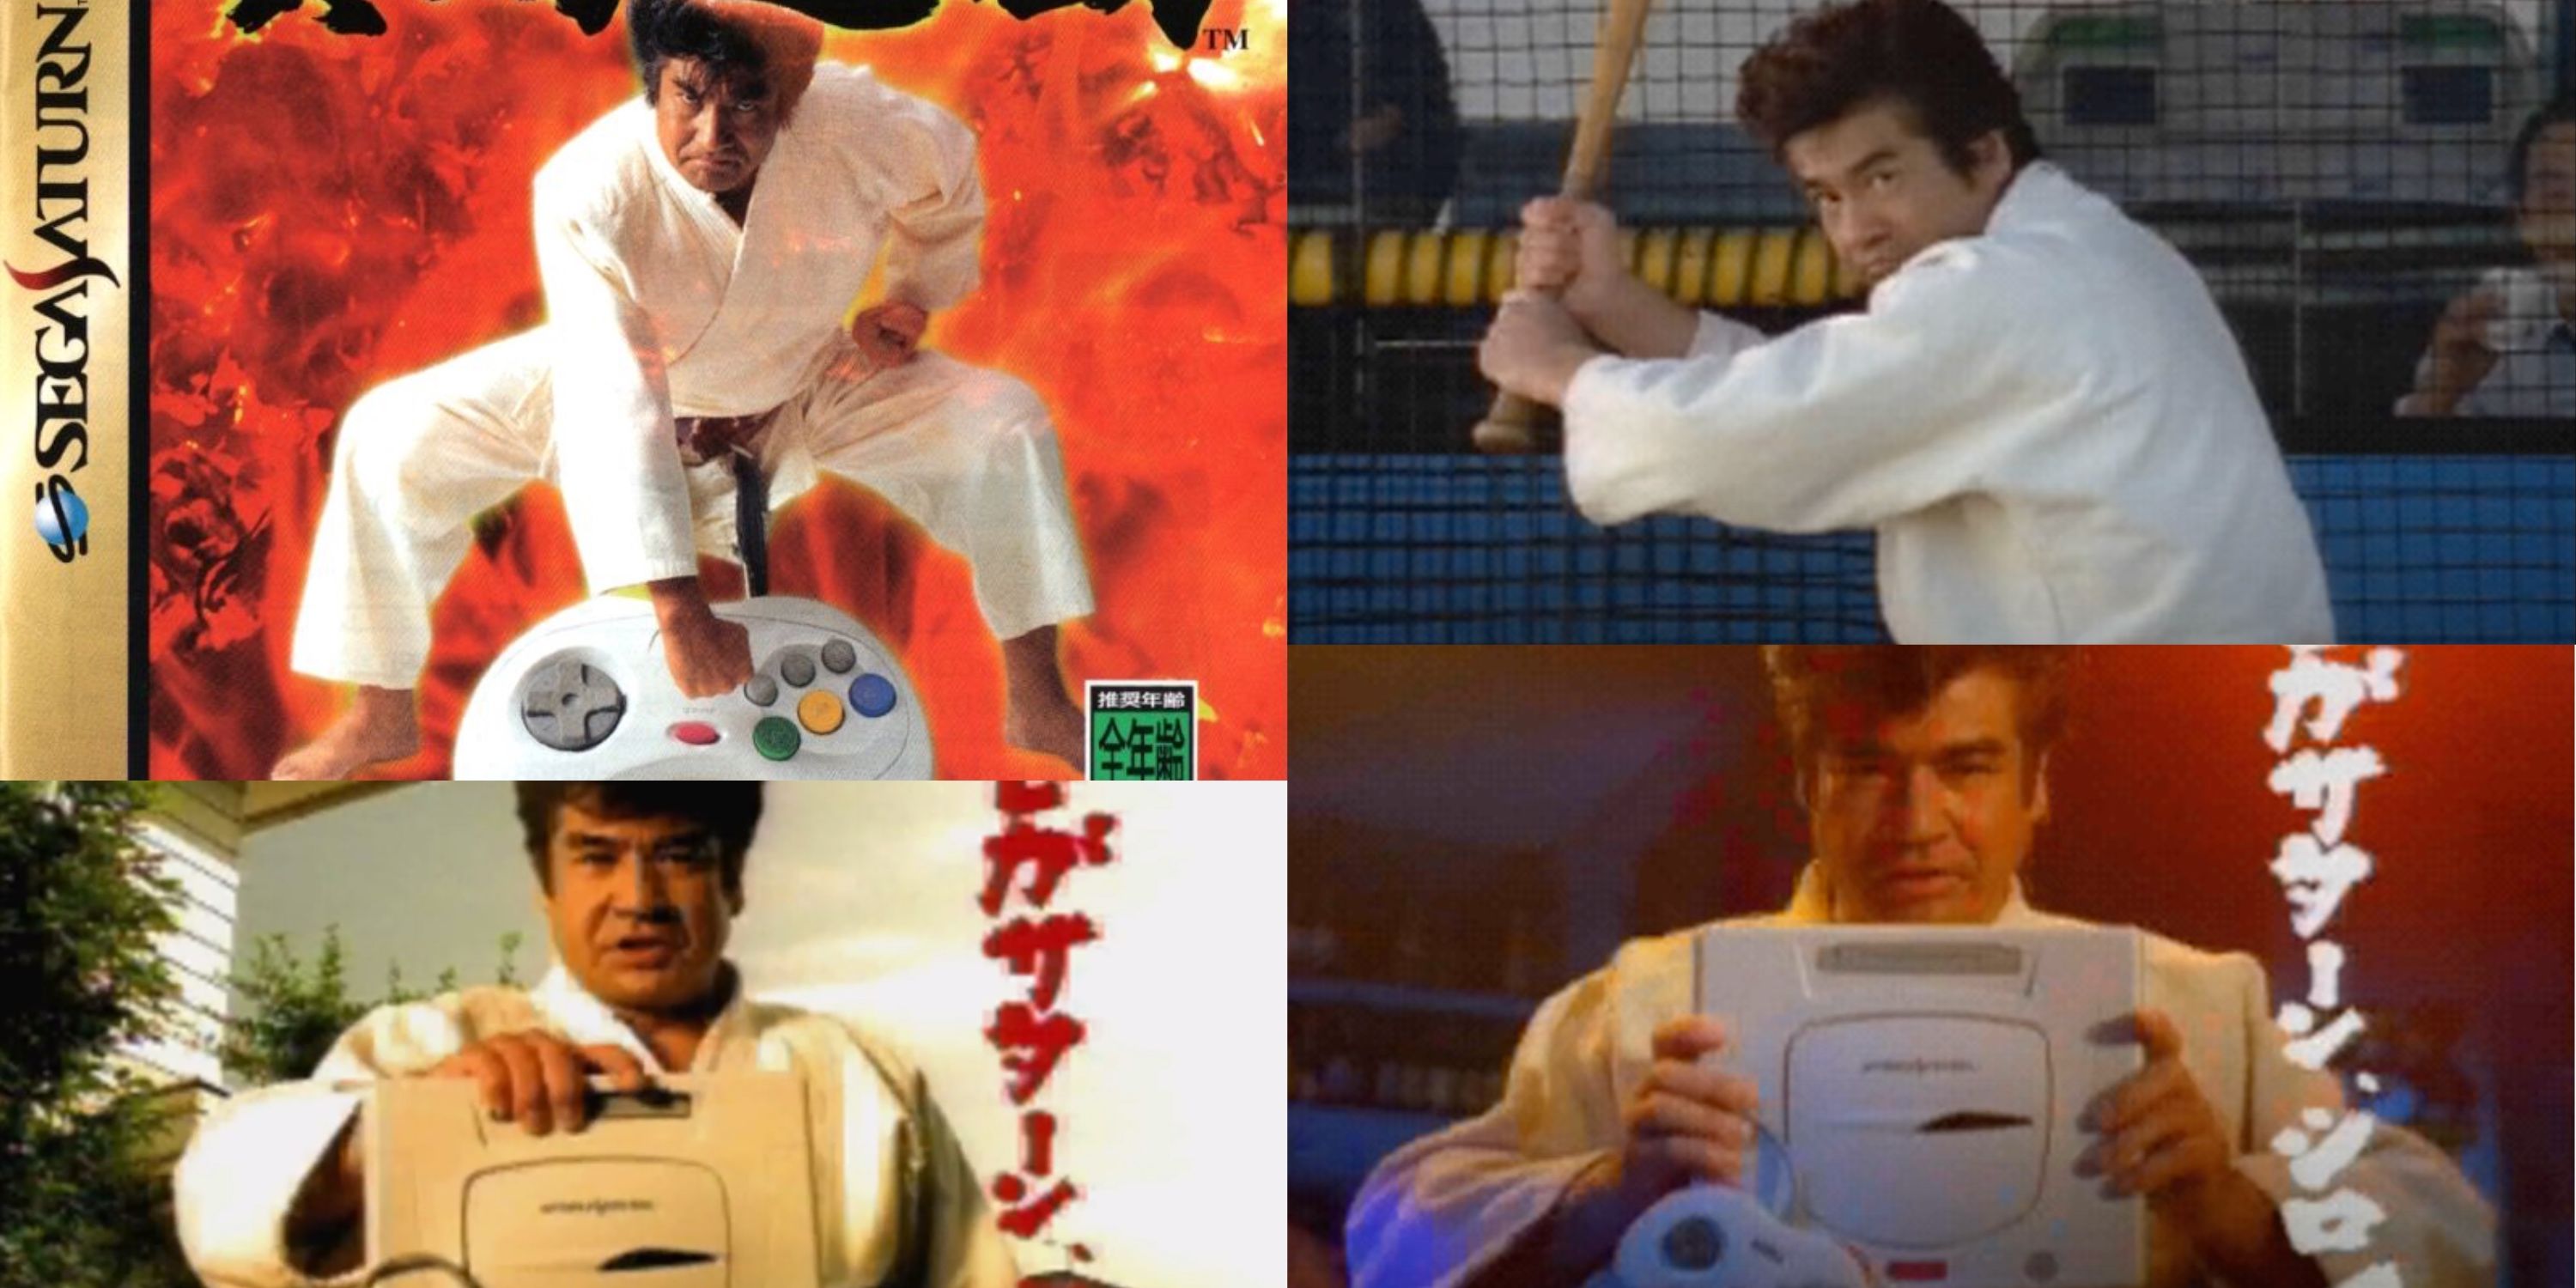 screenshots of Segata Sanshiro: holding a Saturn console, playing baseball and cover art of his own Saturn video game